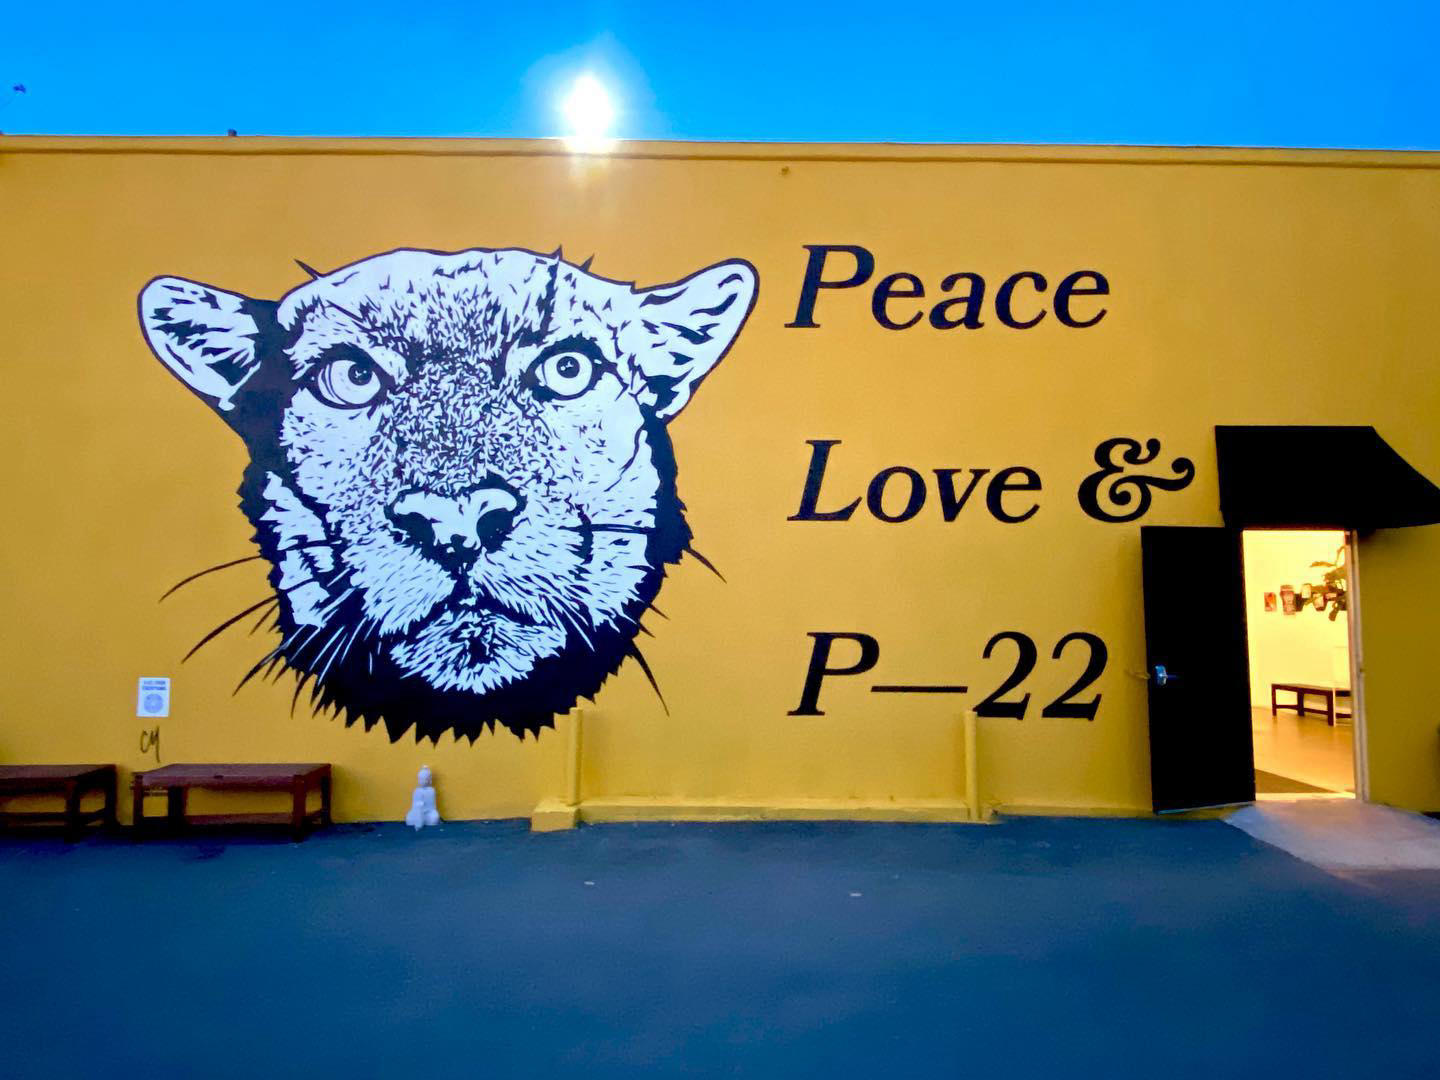 image  1 On February 4th, we will come together to celebrate the life and legacy of P-22 at atahe sold out Gr